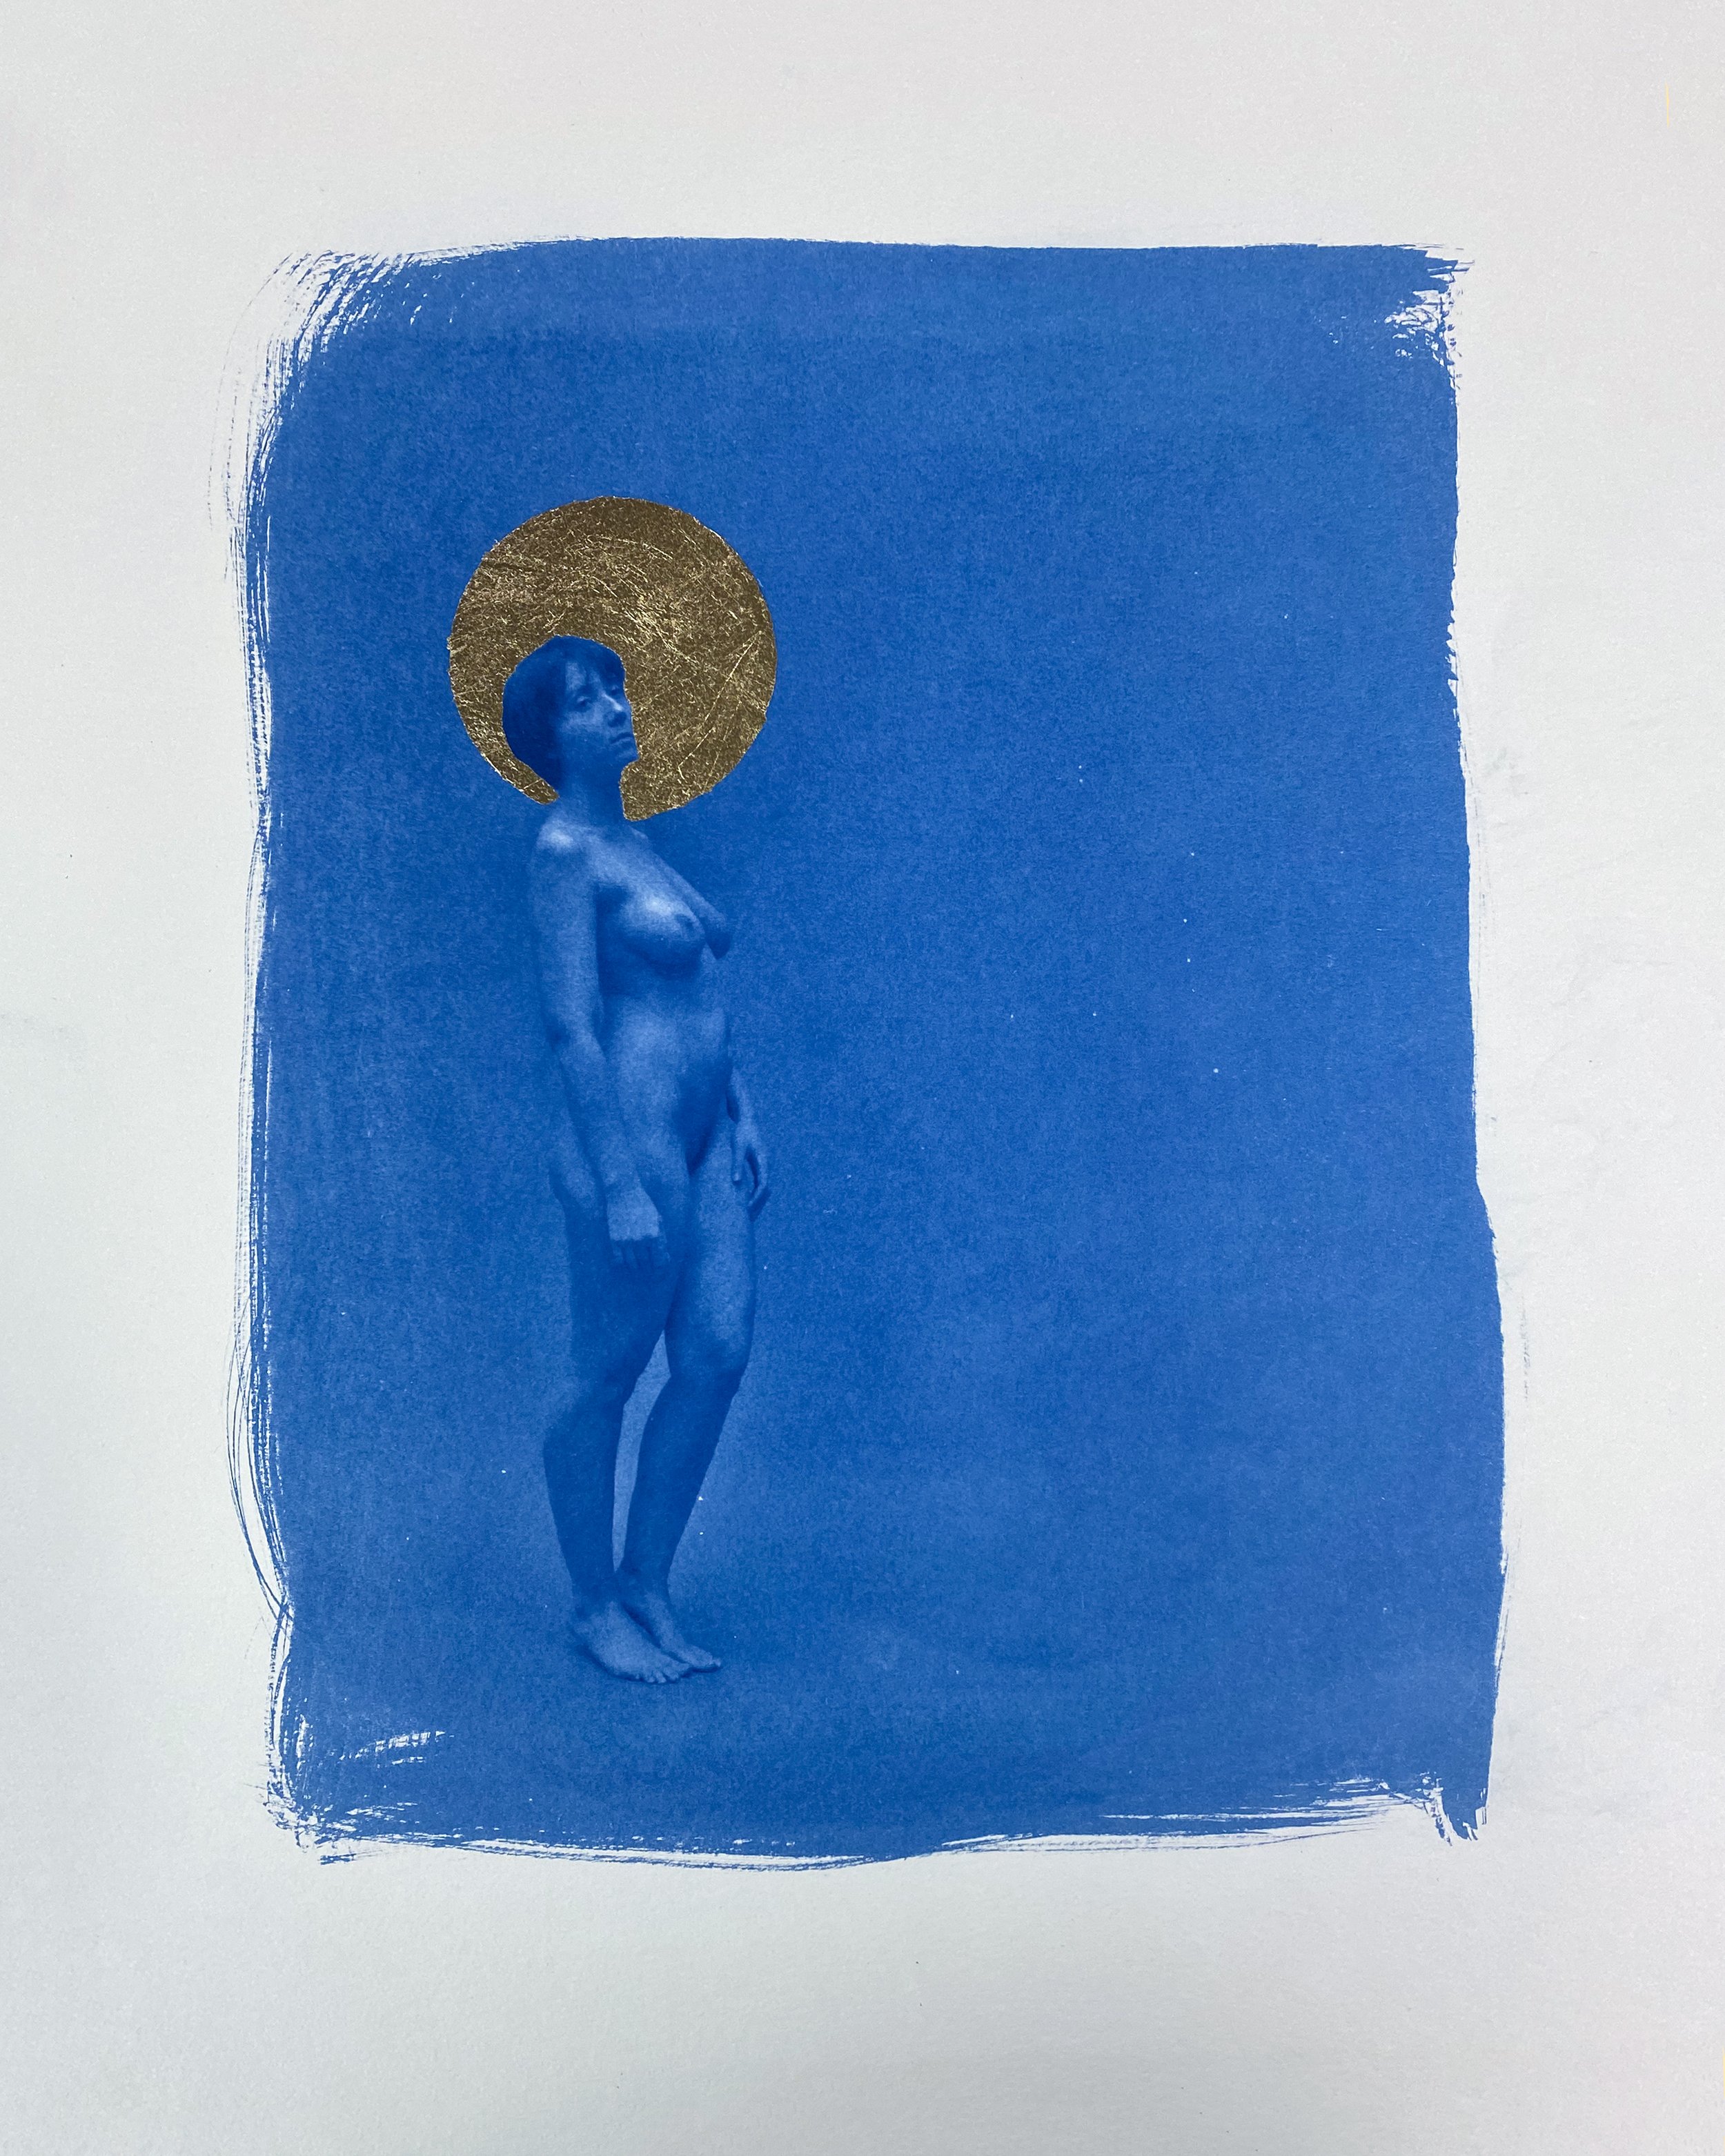   Iron &amp; Gold II   2023  Cyanotype and Gold Leaf  16x20 